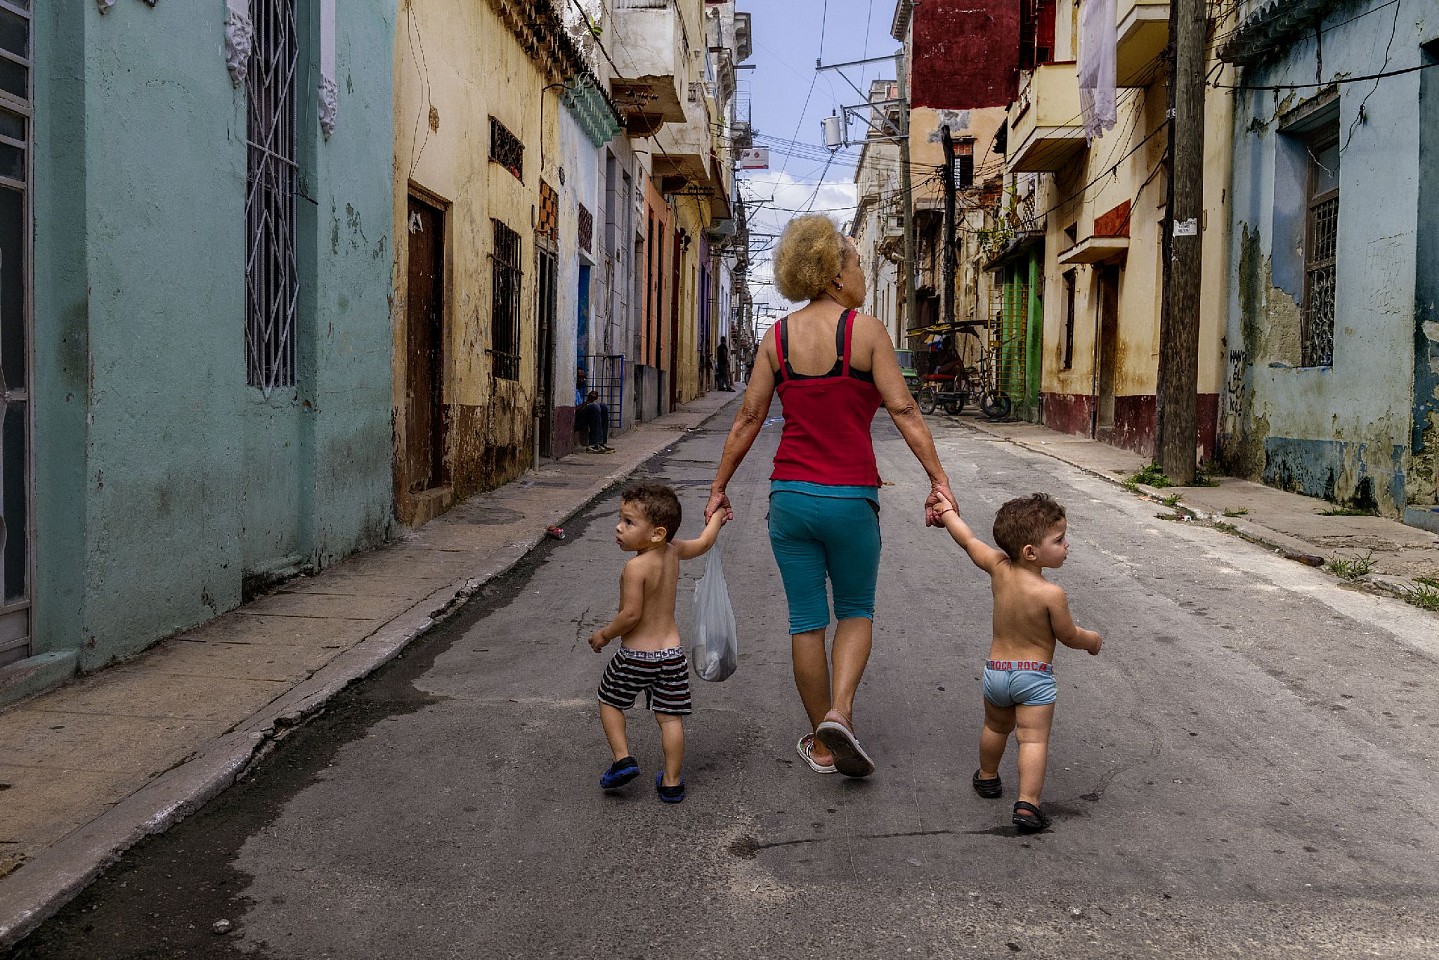 Steve McCurry, Mother and Sons Walk Hand in Hand, 2019
FujiFlex Crystal Archive Print
Price/Size on request